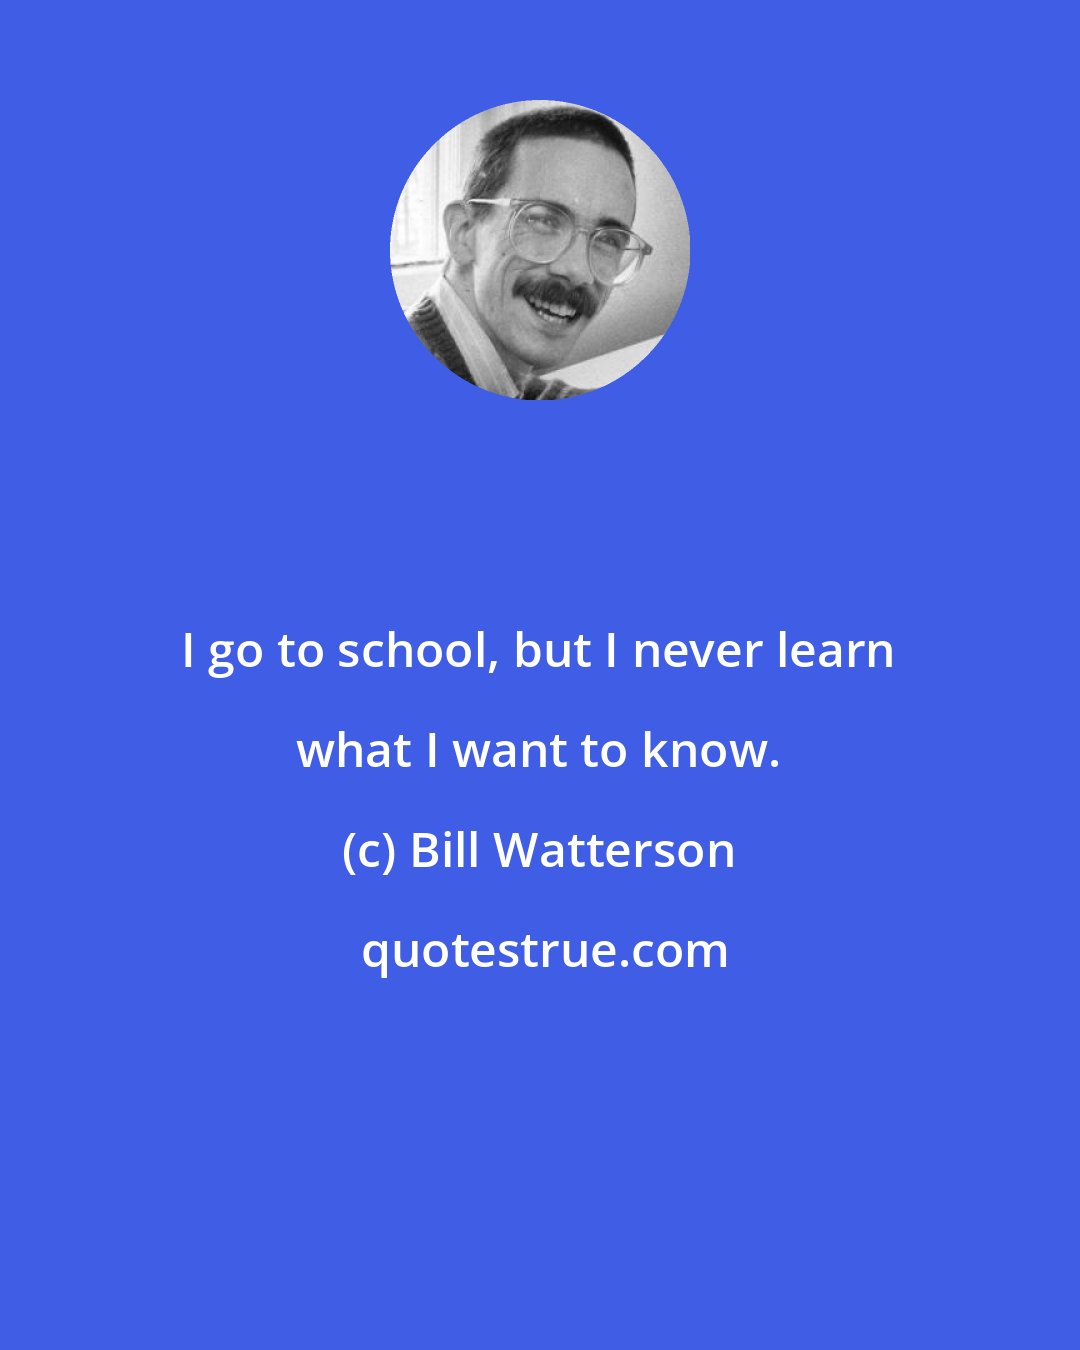 Bill Watterson: I go to school, but I never learn what I want to know.